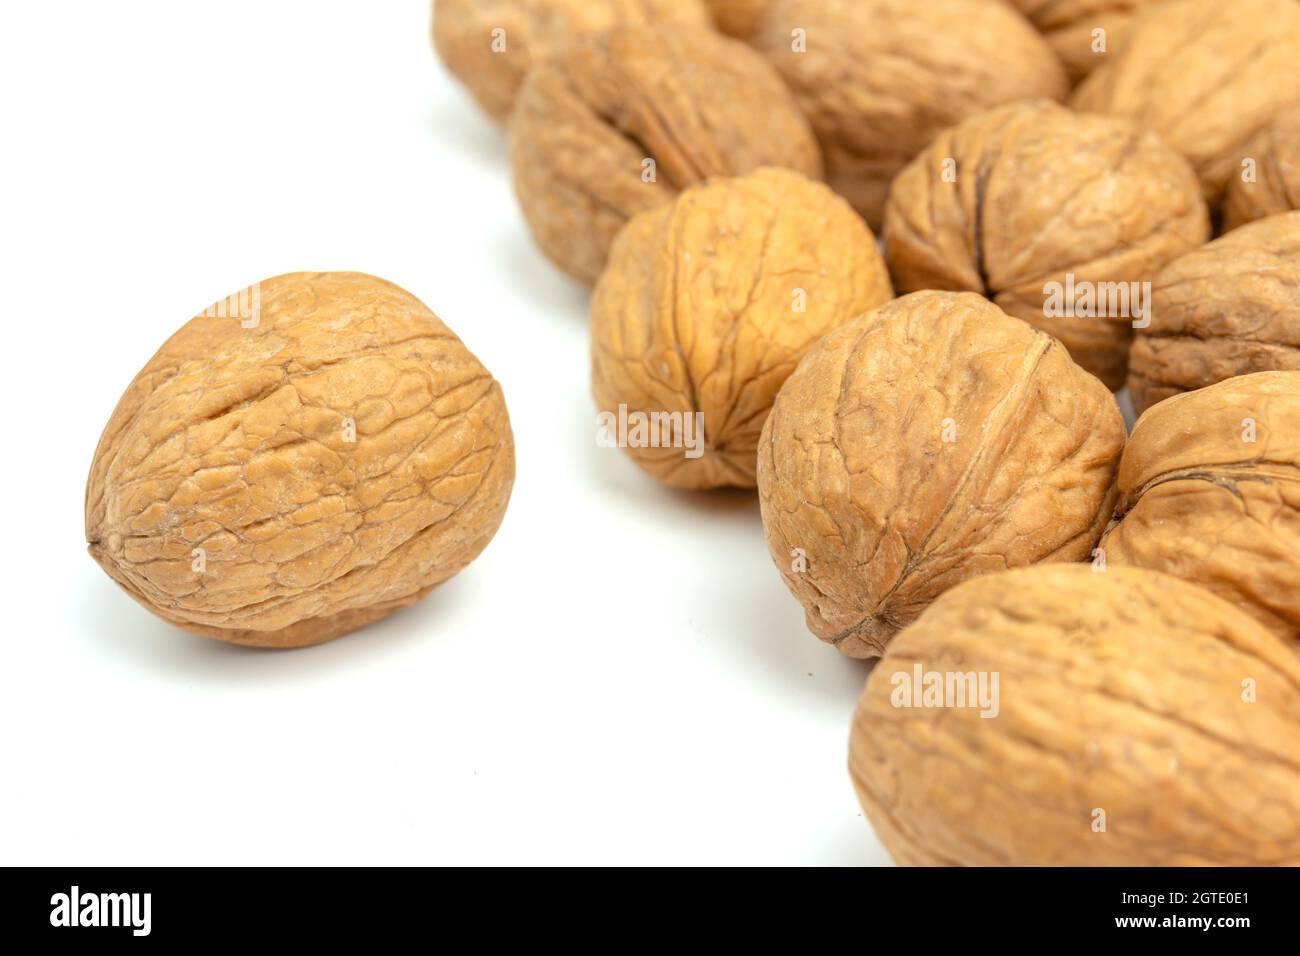 Close-up Of Walnuts Isolated On White Background. Raw Fruits On Table Against White Background. Stock Photo